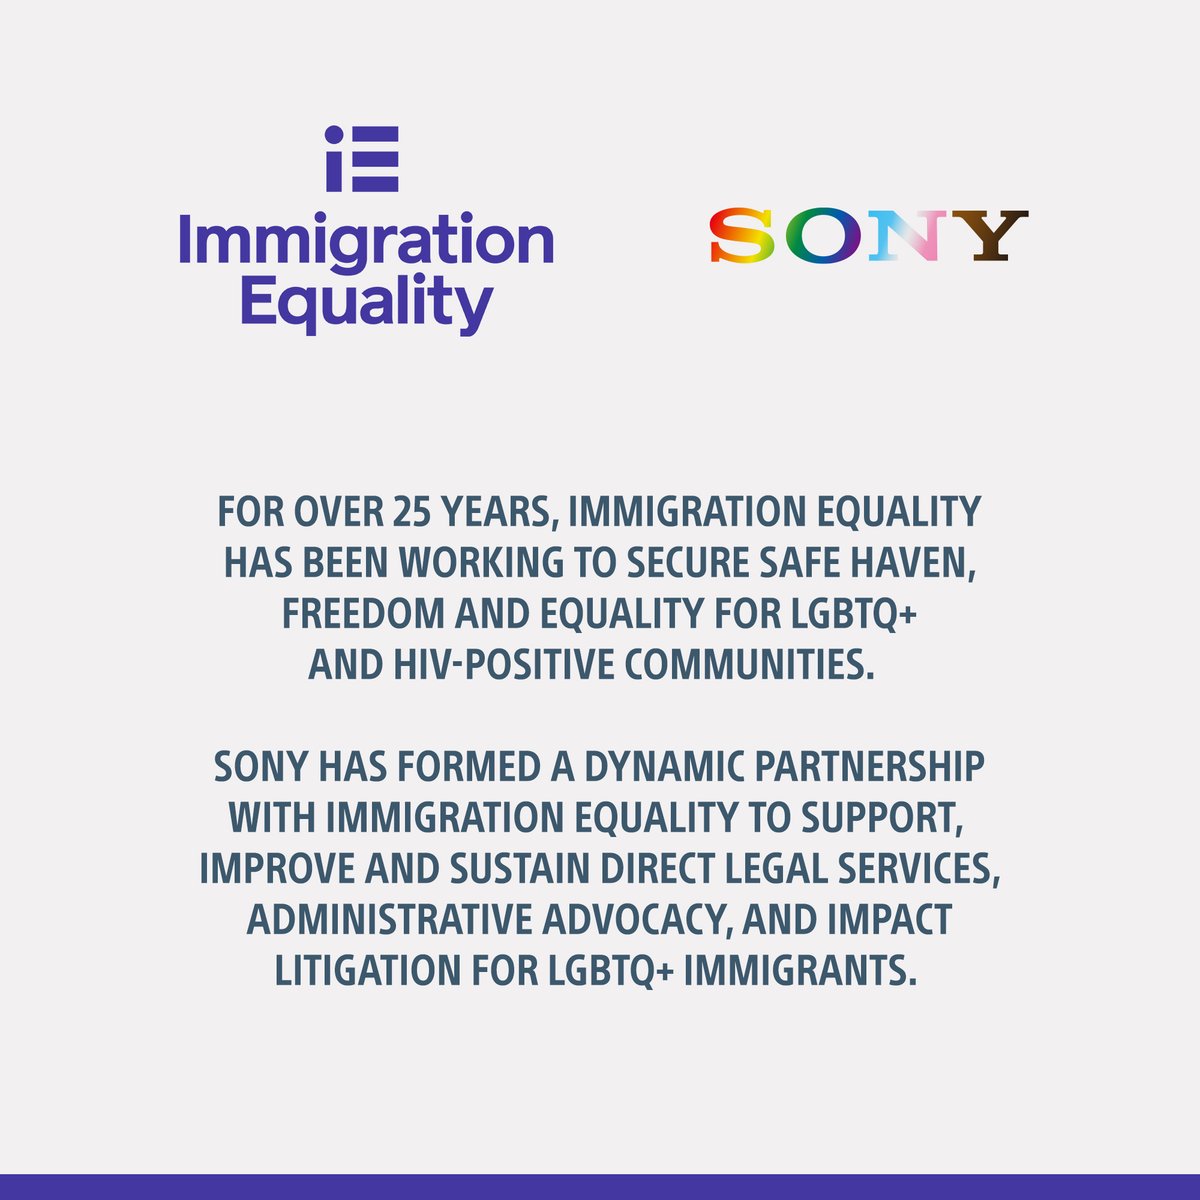 Highlighting the amazing work done by our partners @IEquality ❤️ 

It's important for everyone to have a voice in our society. Across the Sony family, we’re proud to commit our resources to the LGBTQ+ community.